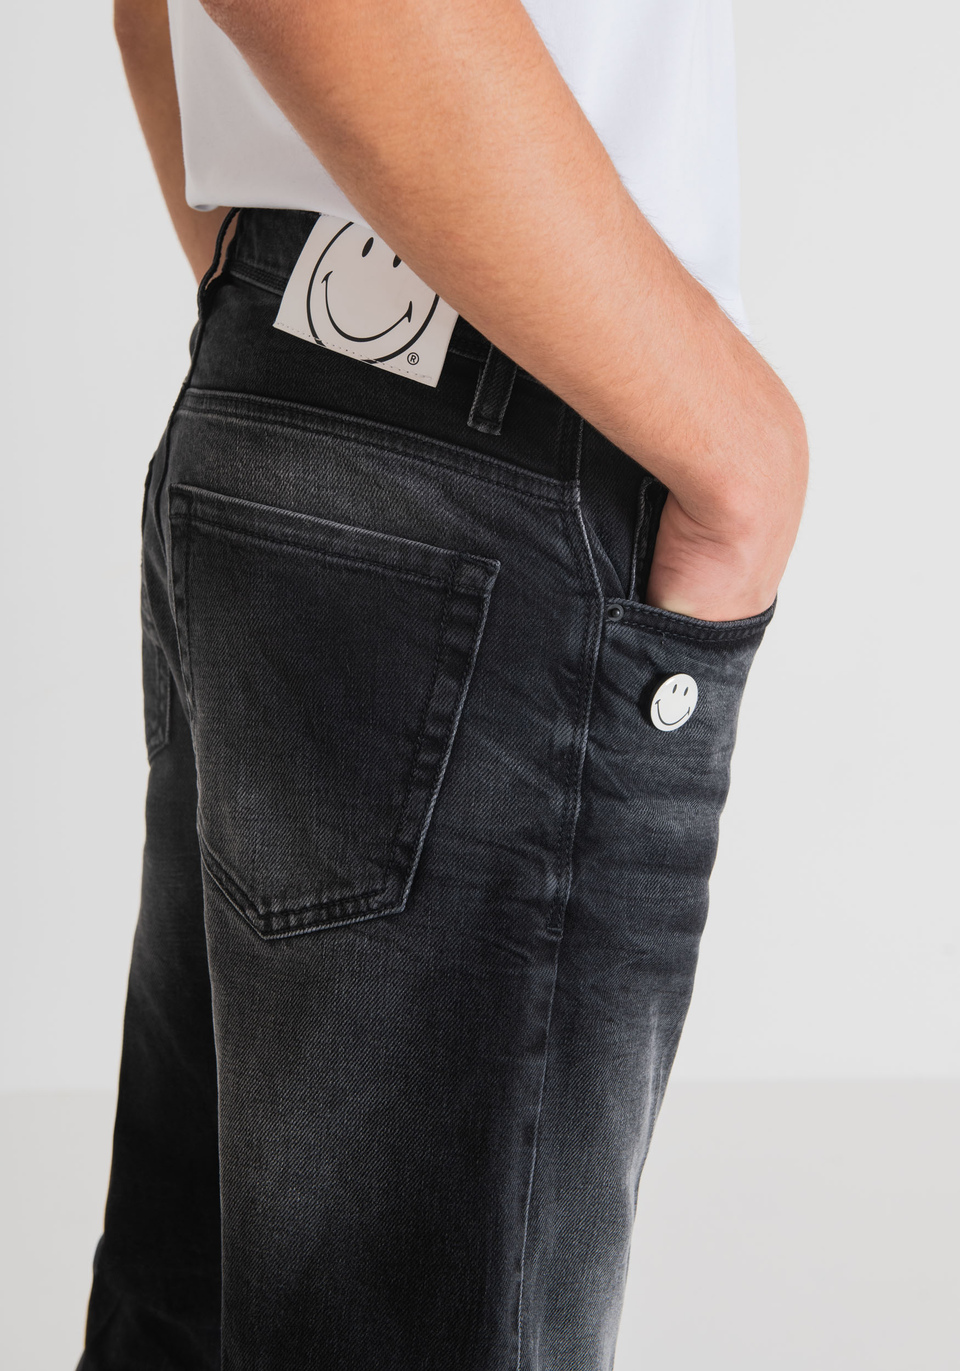 "CLEVE" SLIM-FIT JEANS WITH SMILEY LOGO - Antony Morato Online Shop